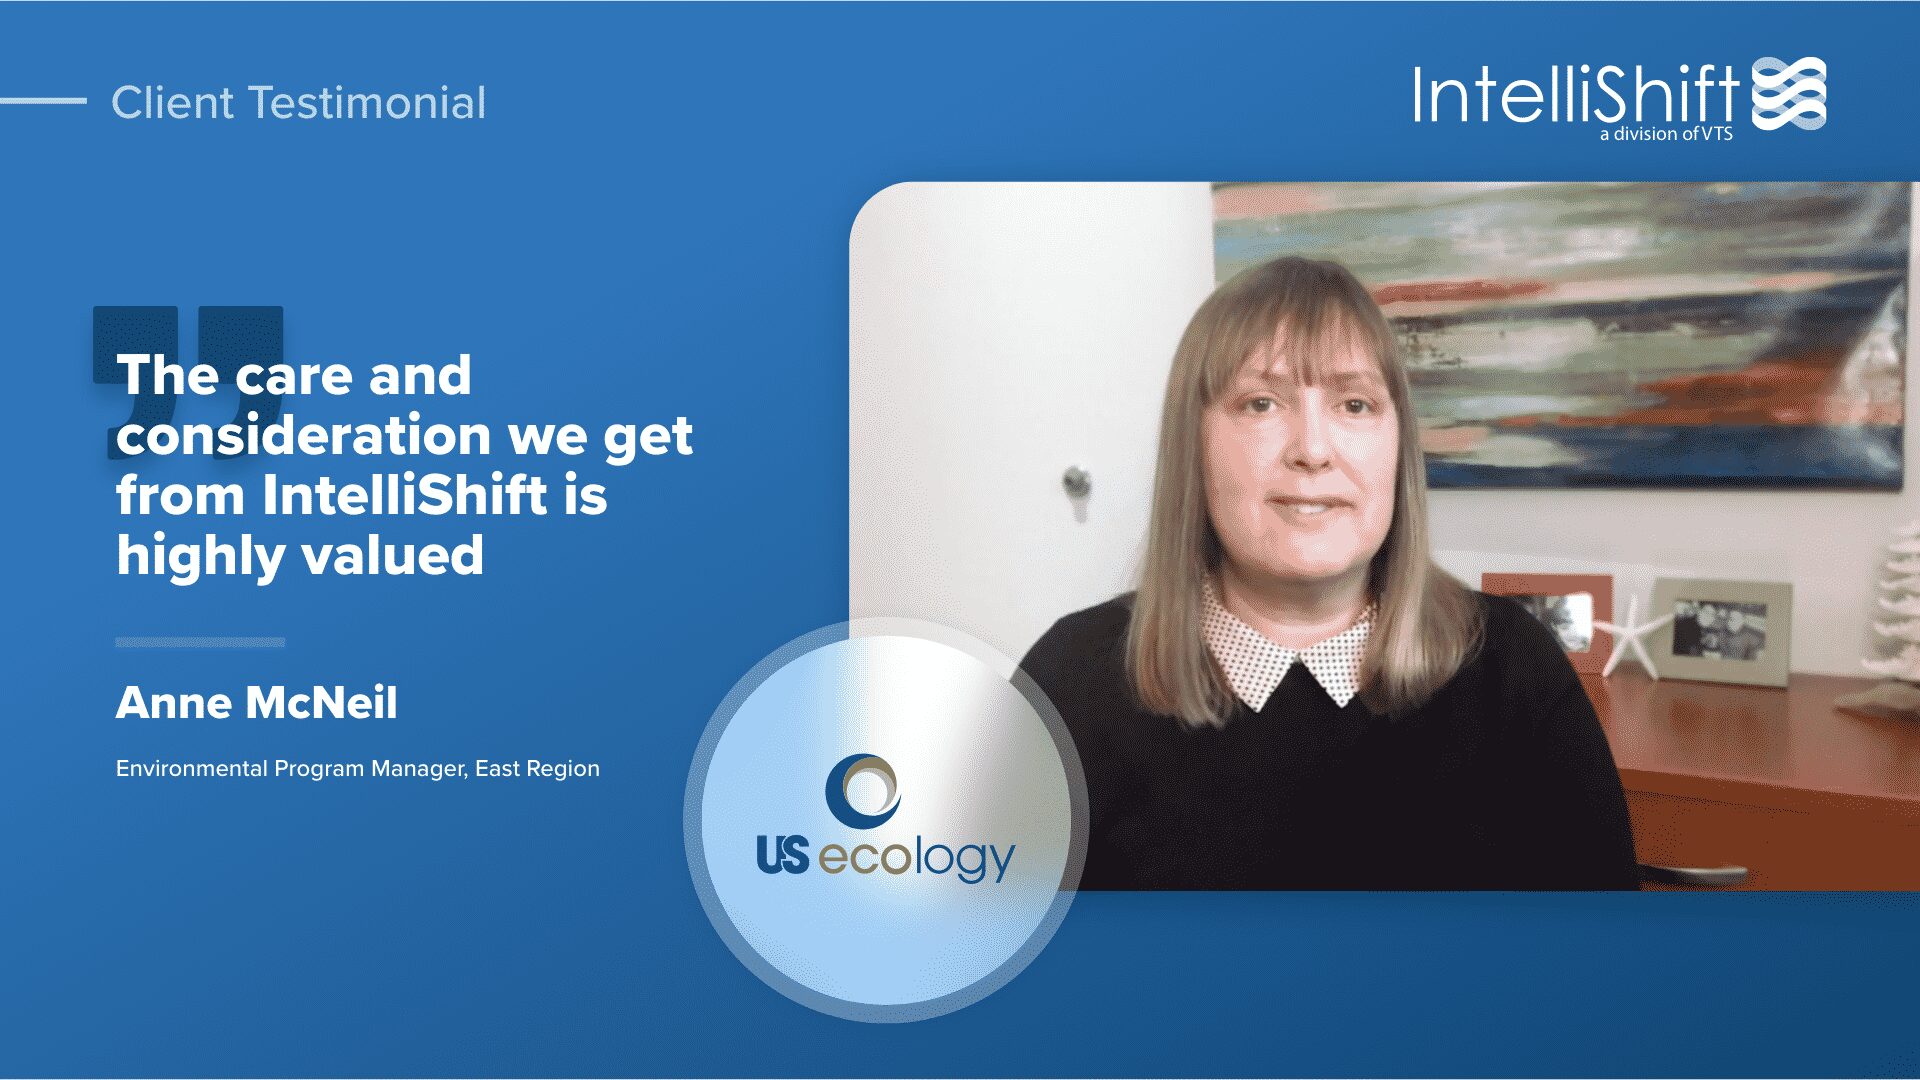 Video: Client Spotlight – US Ecology Shares Why IntelliShift is a Highly Valued Partner